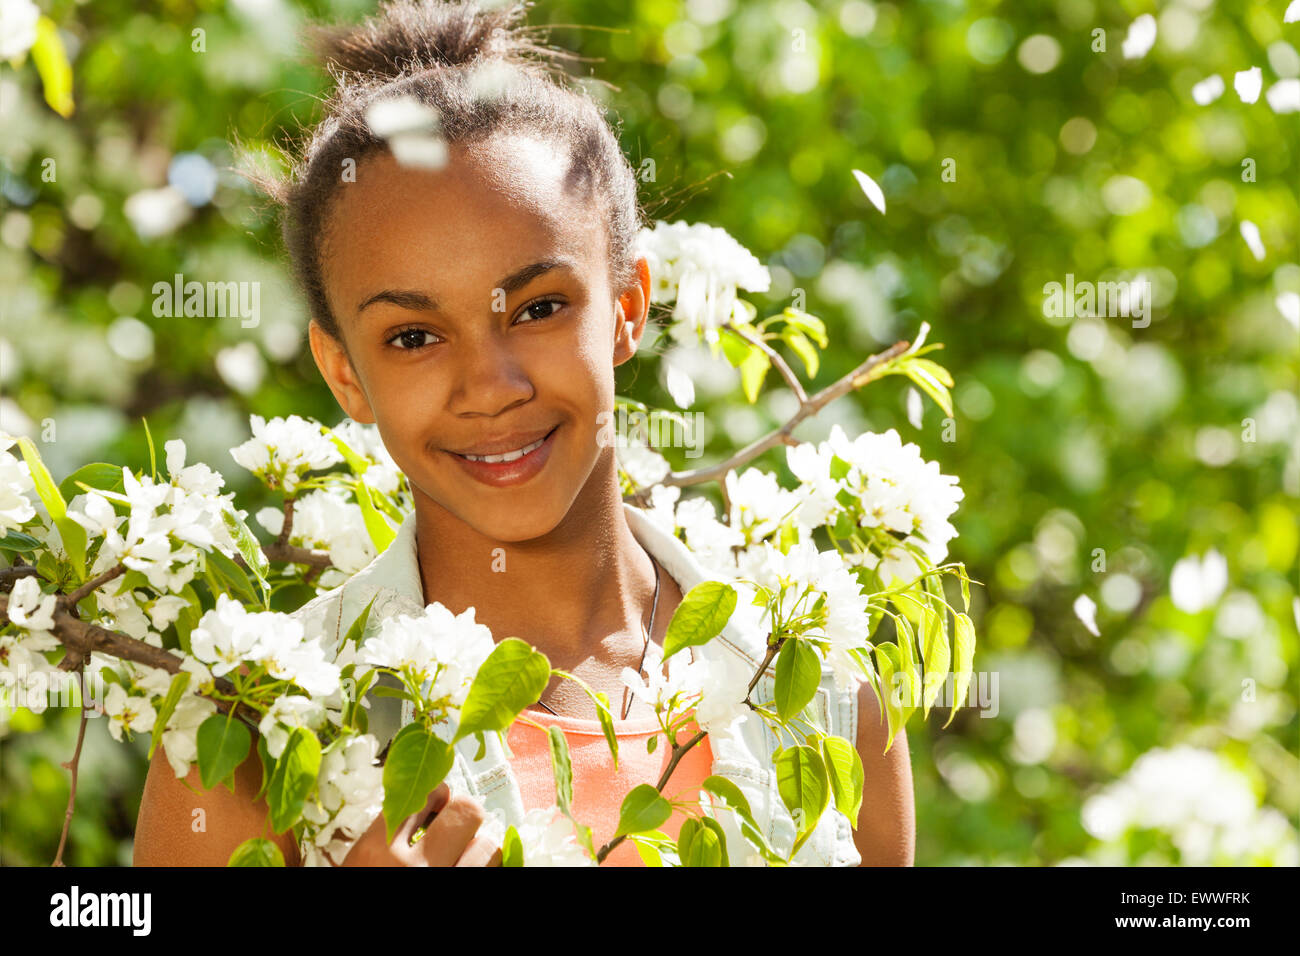 African teenager girl with flowers on pear tree Stock Photo